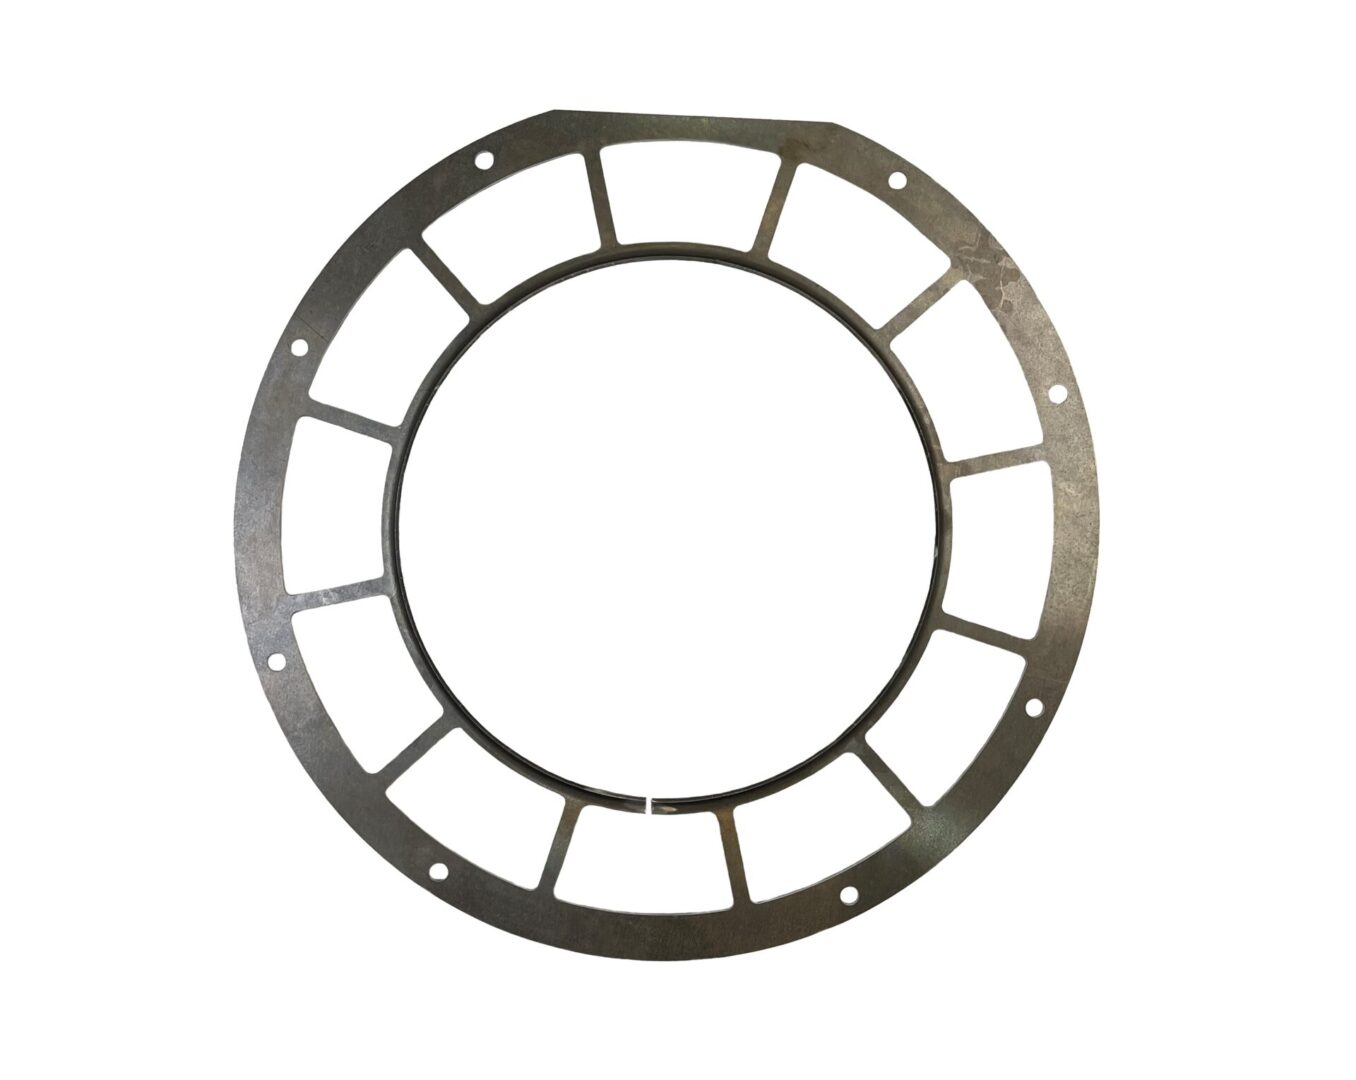 A metal circular frame with a circle cut out of it.